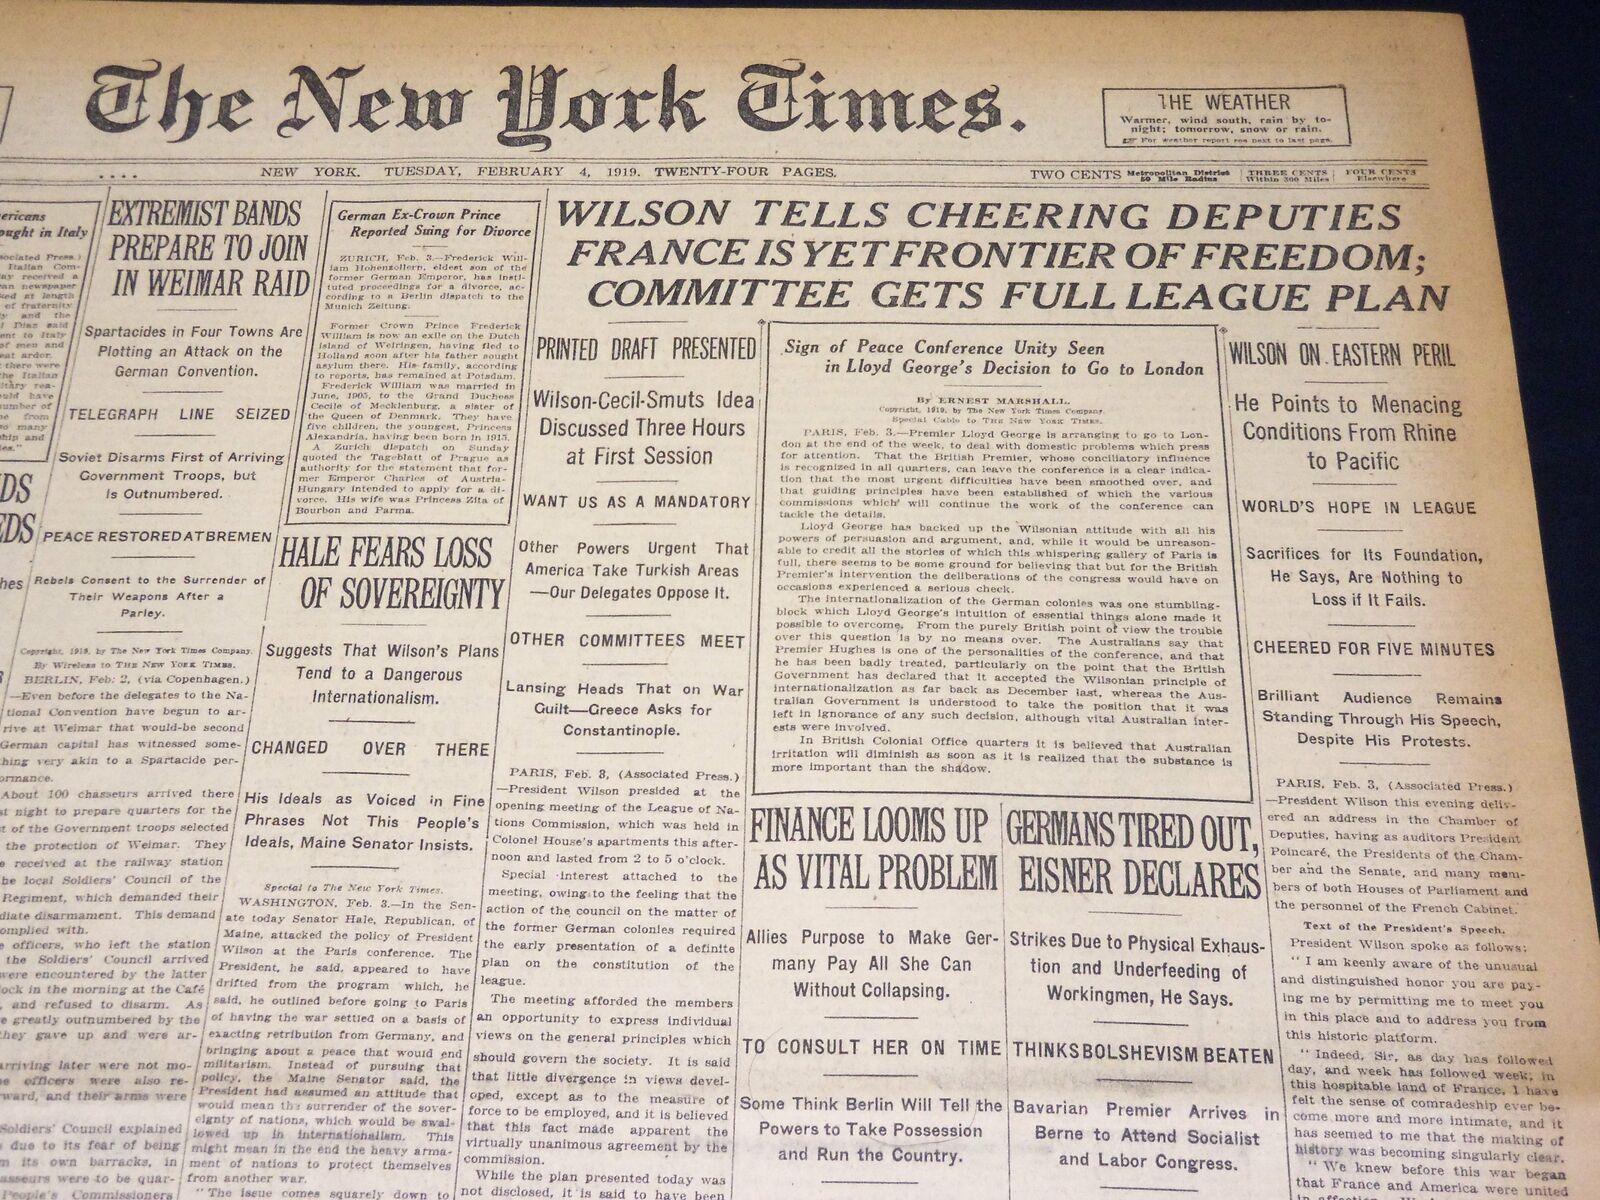 1919 FEBRUARY 4 NEW YORK TIMES - COMMITTEE GETS FULL LEAGUE PLAN - NT 7959